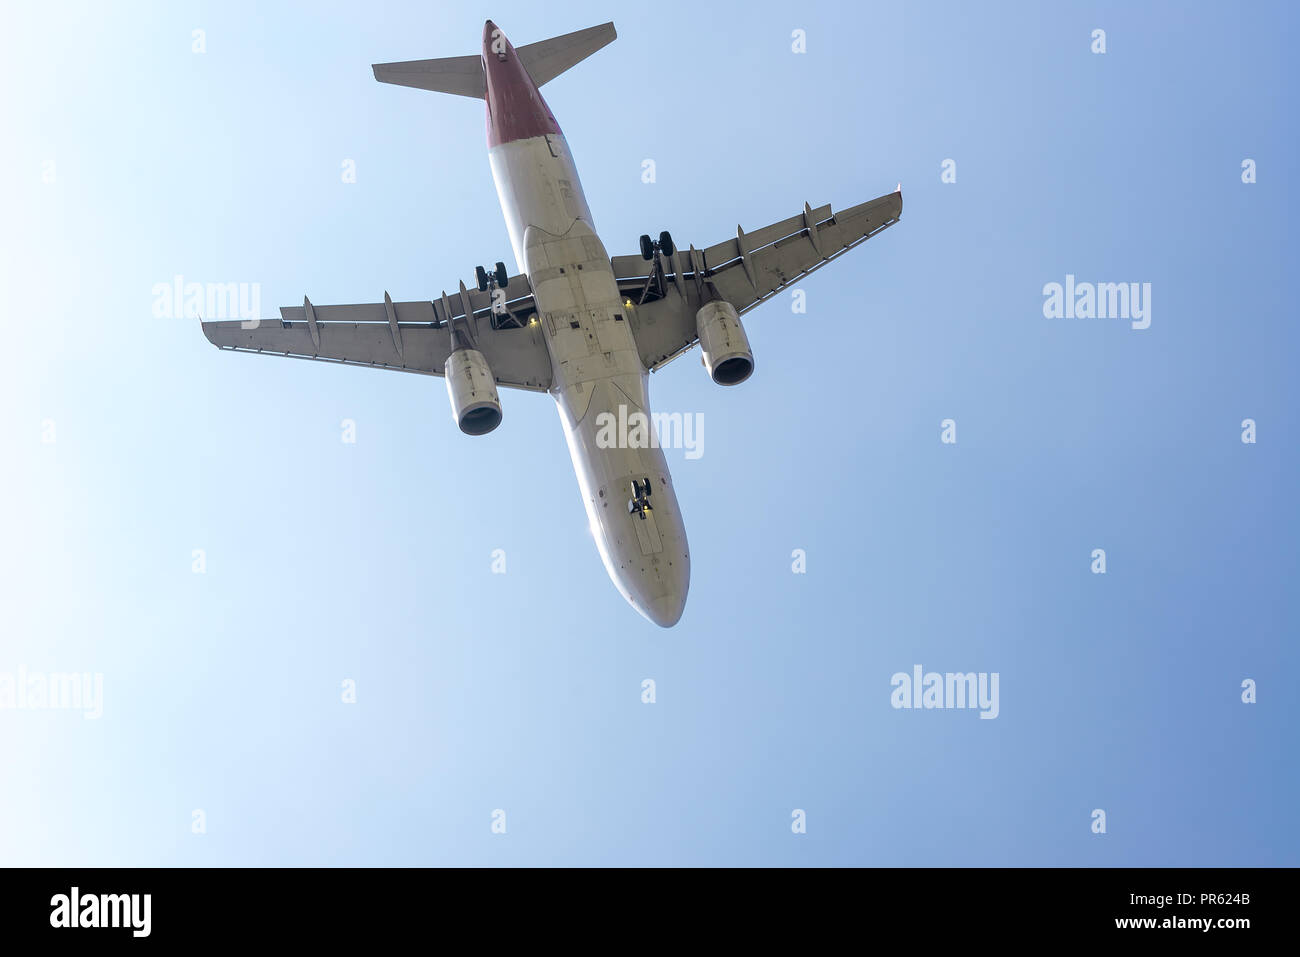 Close up view of an aircraft approaching the airport to land Stock Photo